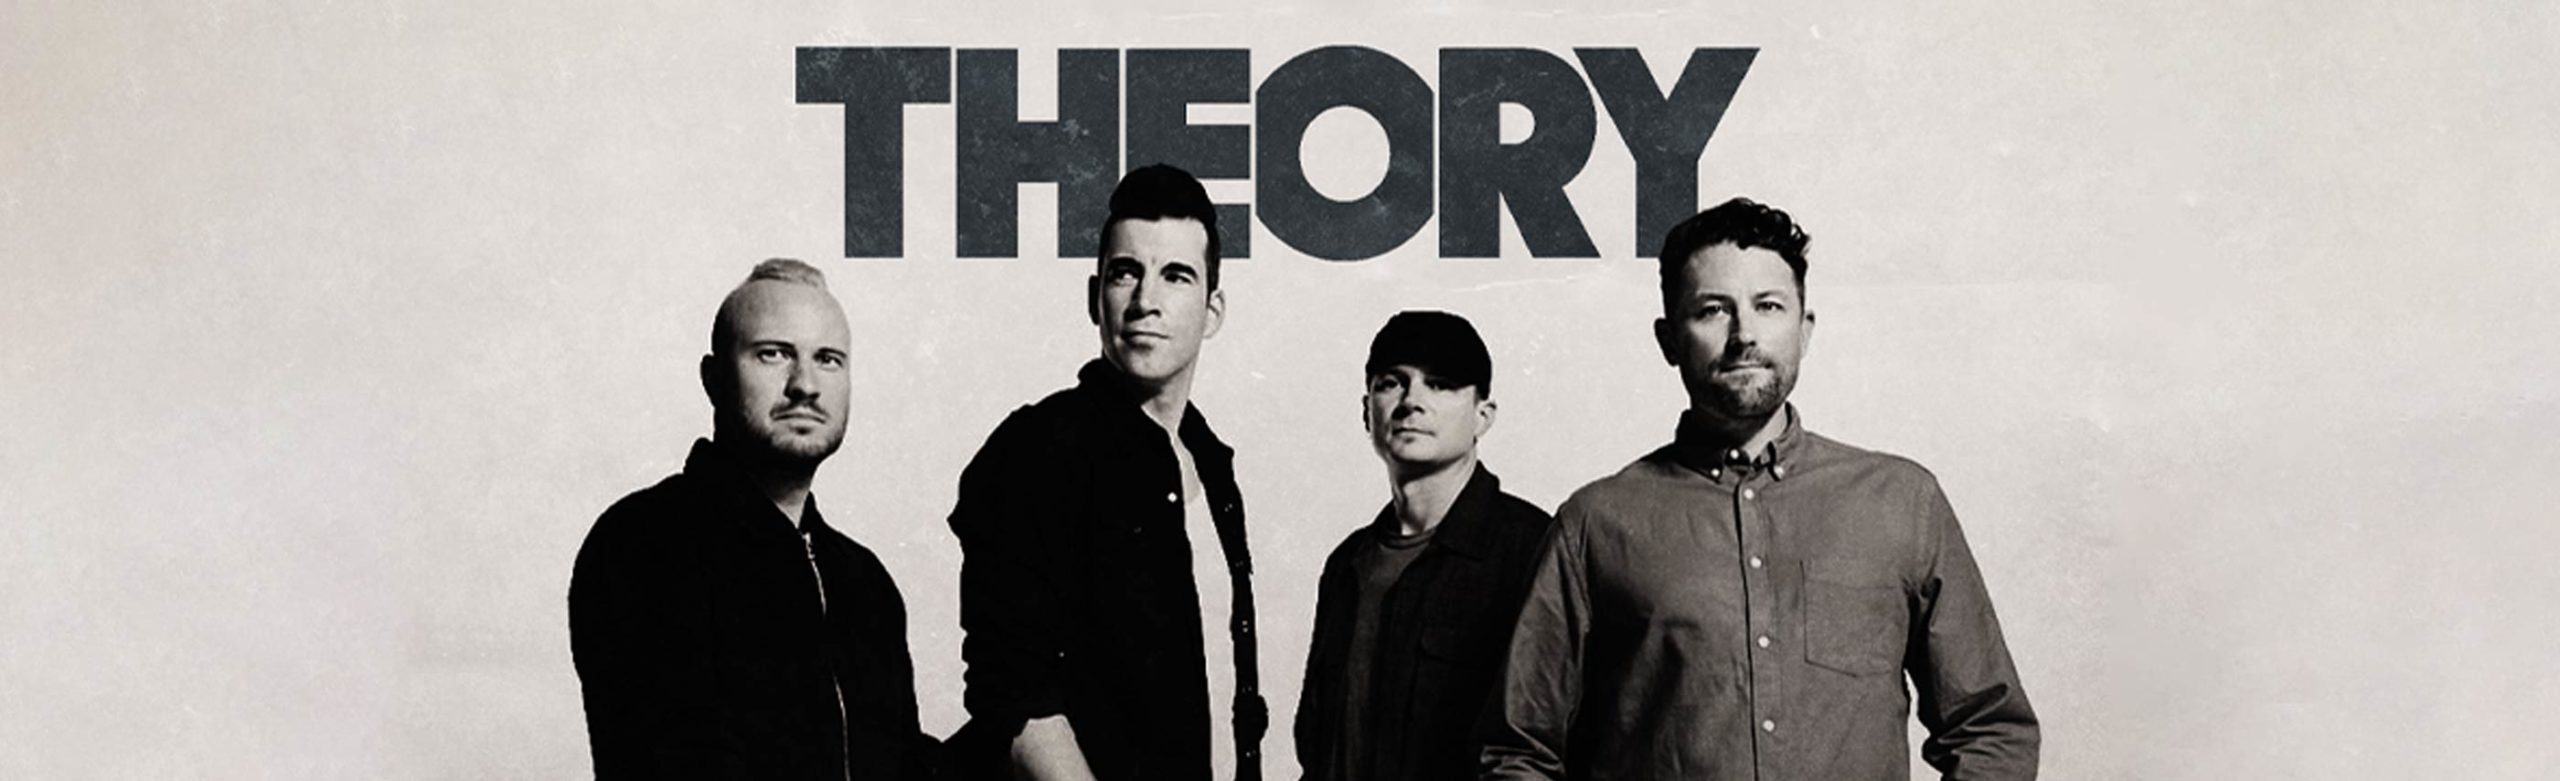 Theory of a Deadman Will Return to Montana for Concerts in Missoula & Bozeman Image